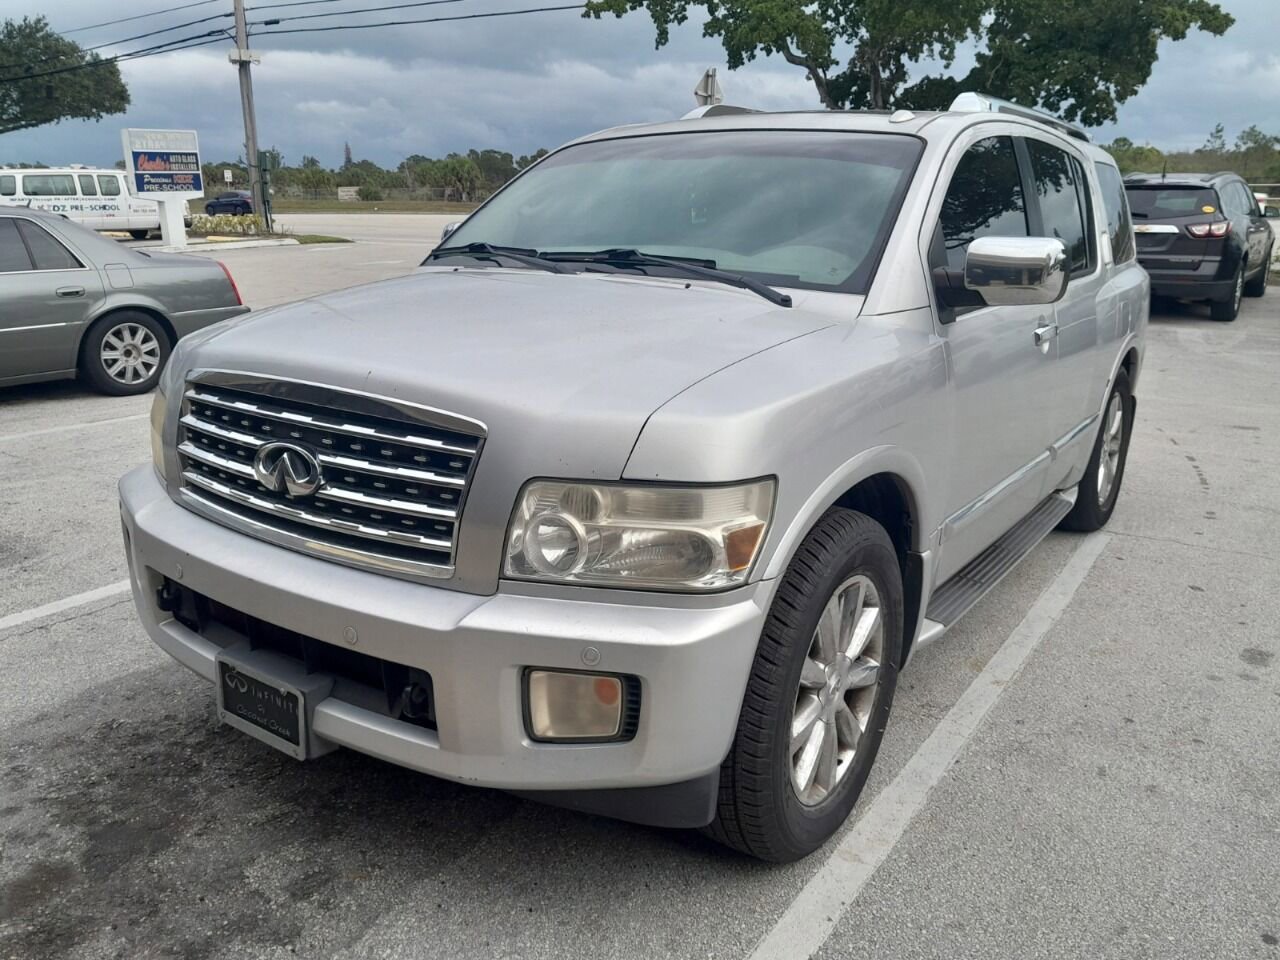 Used 2008 INFINITI QX56 for Sale Right Now - Autotrader